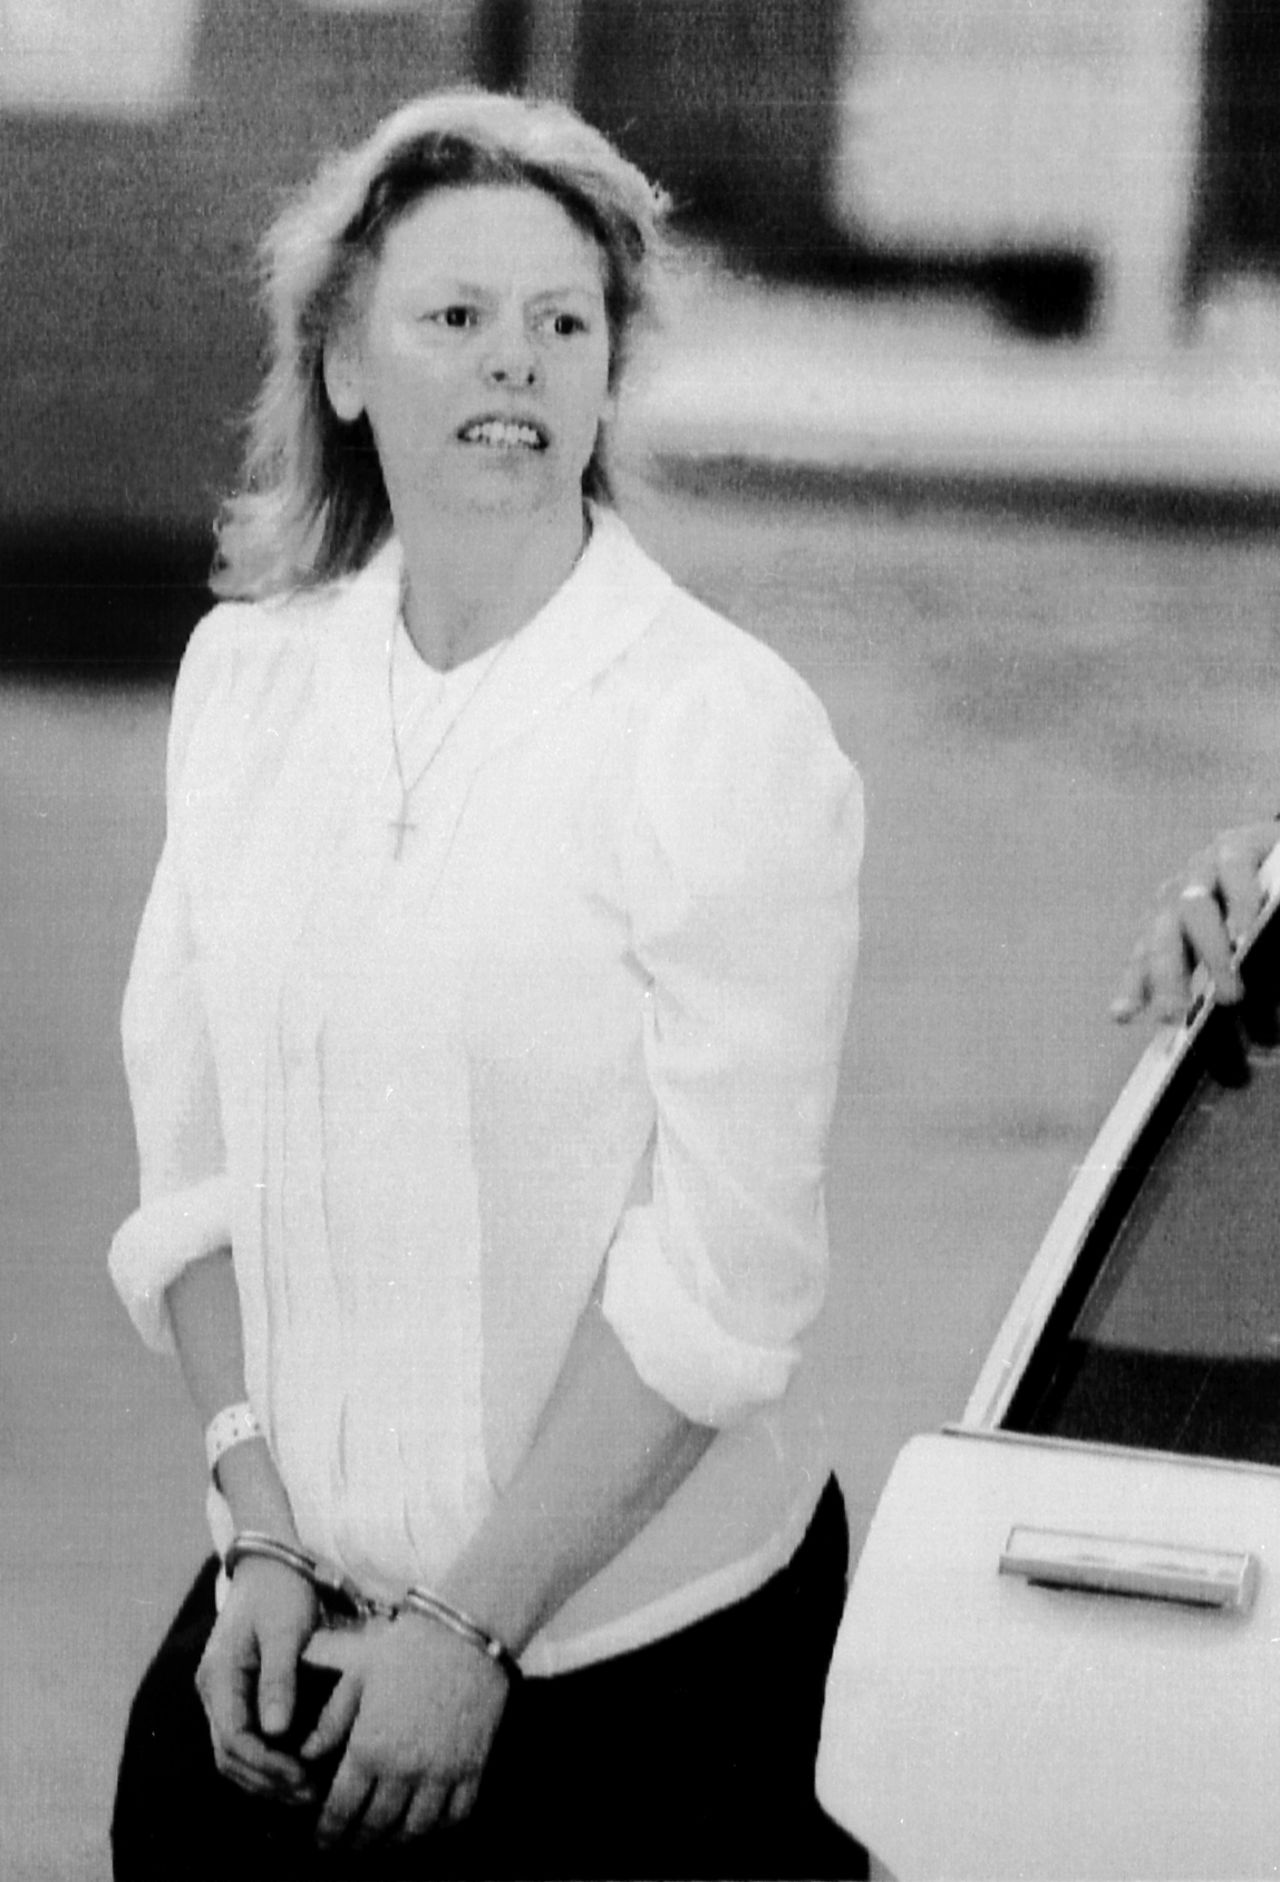 Aileen Wuornos was executed in Florida in 2002 for the murders of seven men whom she had lured by posing as a prostitute or a distressed traveler.